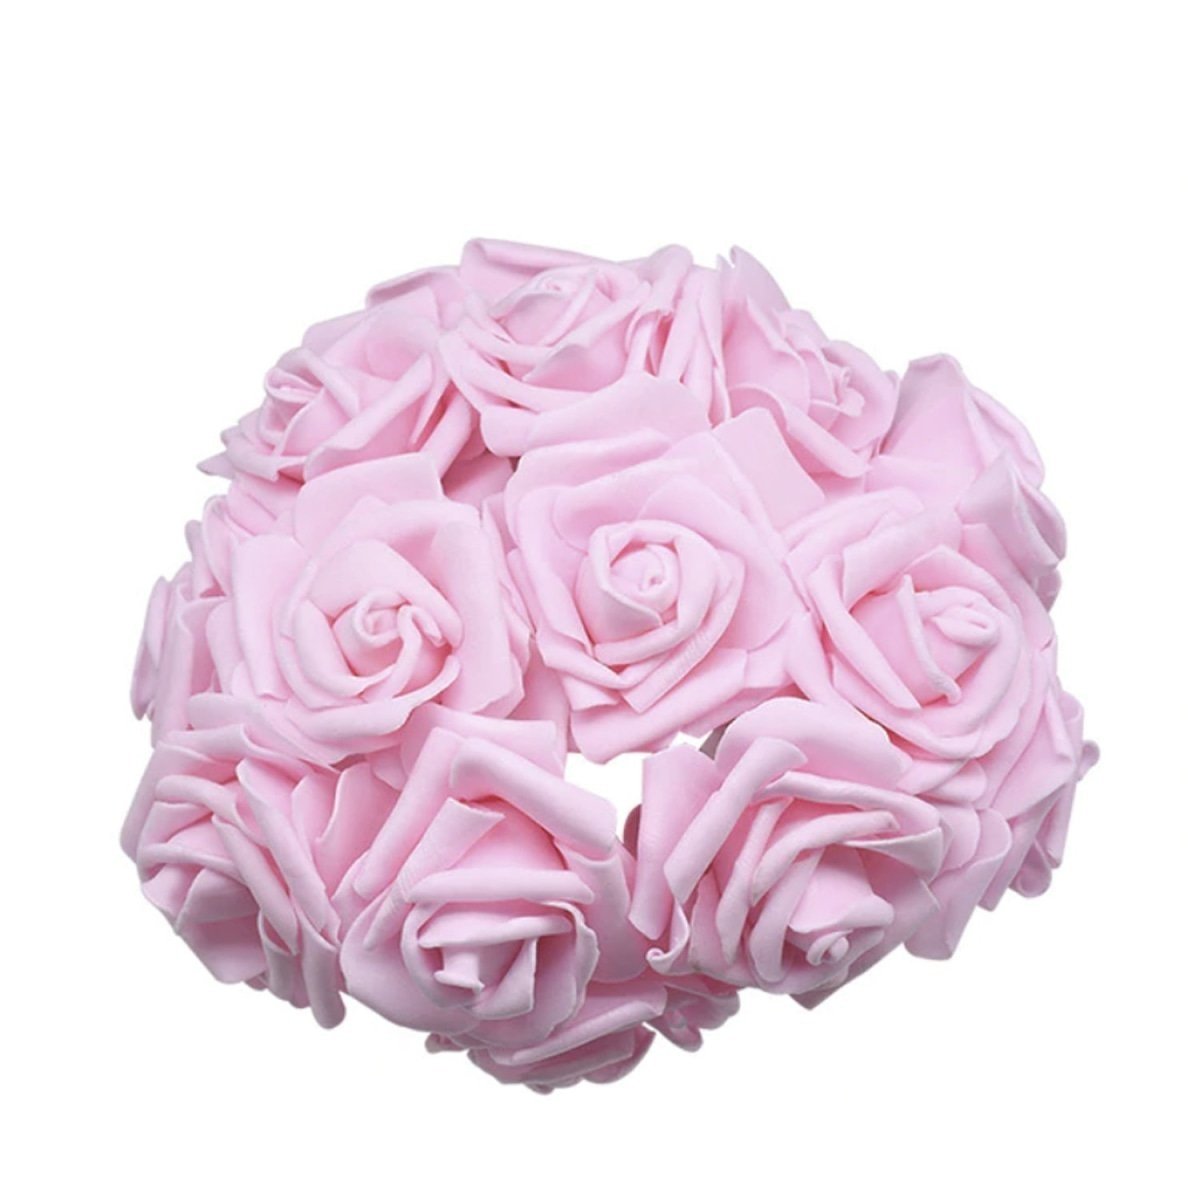 20pcs 7cm Artificial Flowers with Stems Foam Rose Fake Bride Bouquet Wedding - Light Pink - - Asia Sell